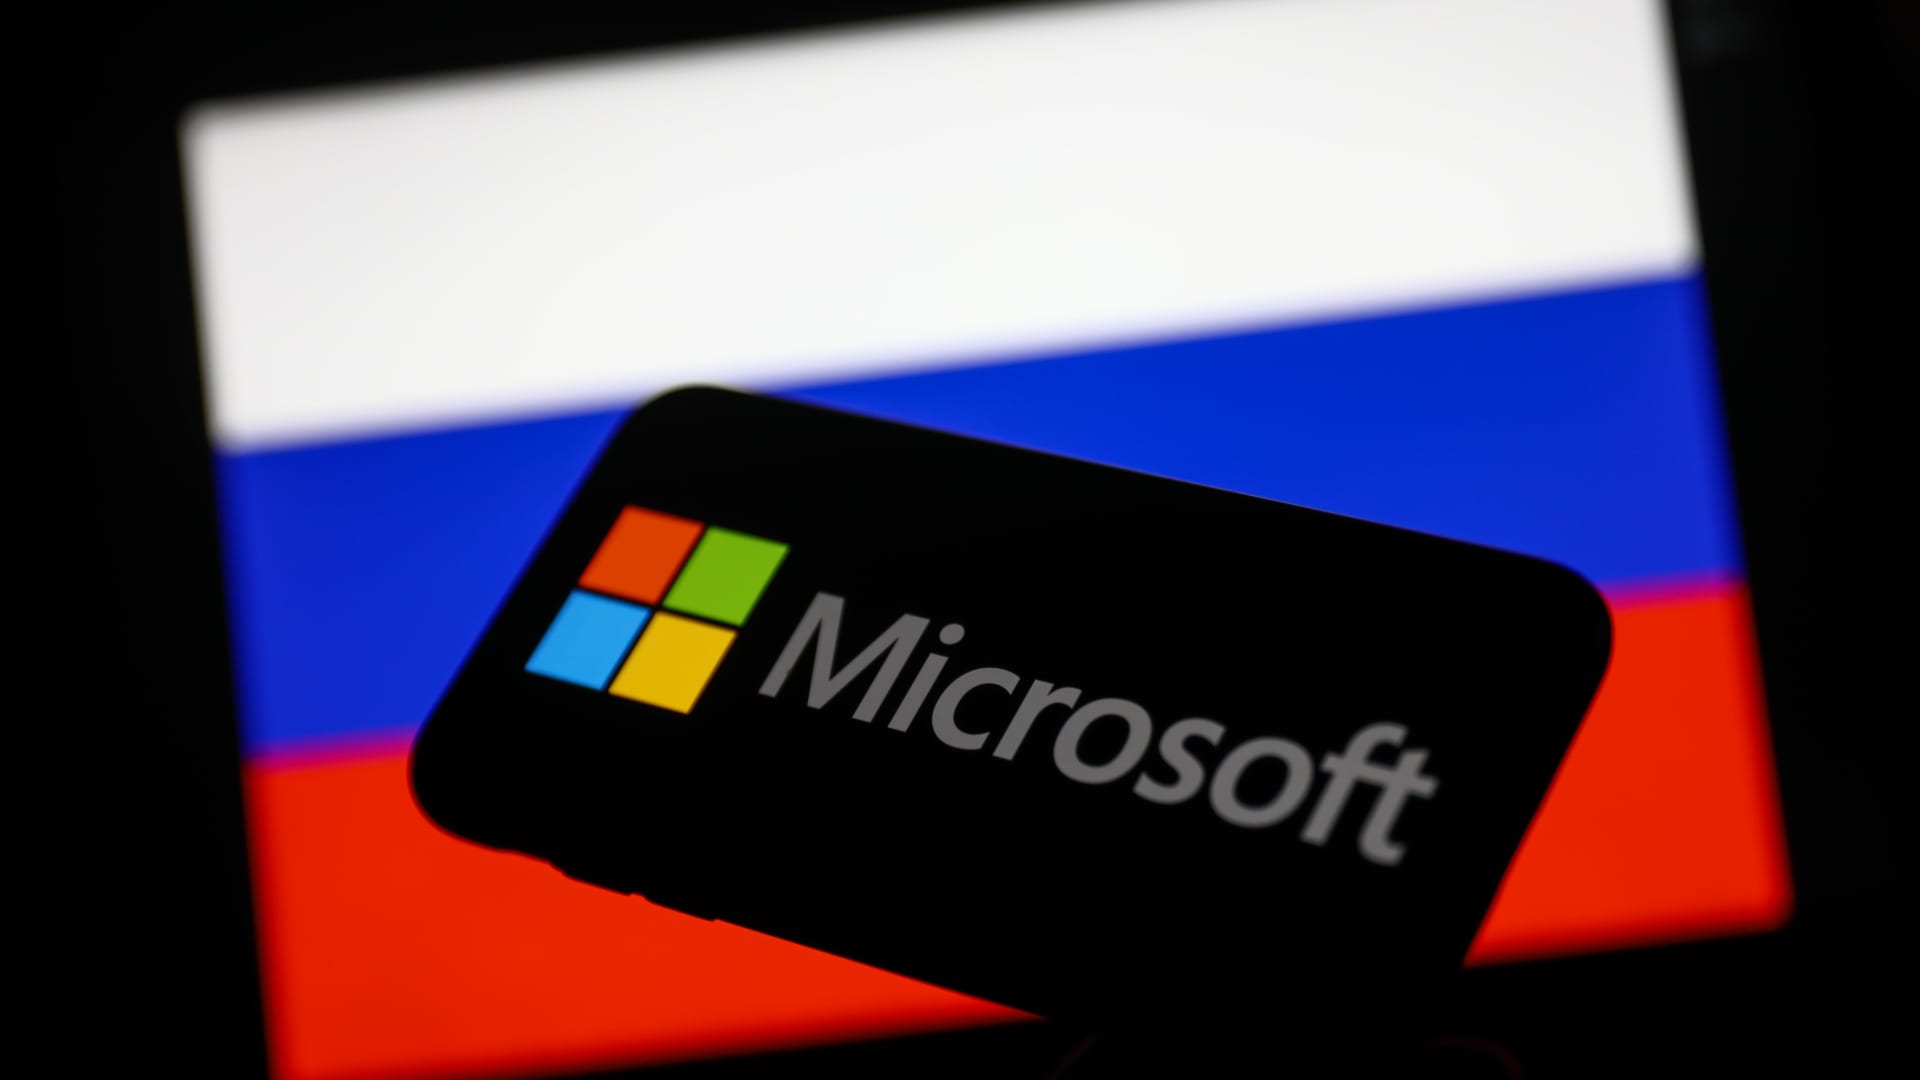 Microsoft is not the first large multinational company to suspend or stop doing business in Russia.  Many Western companies, including Dell, Apple, Nike and Adidas, have severed ties with Russia, closing stores or halting sales.  Photo: @AFP.